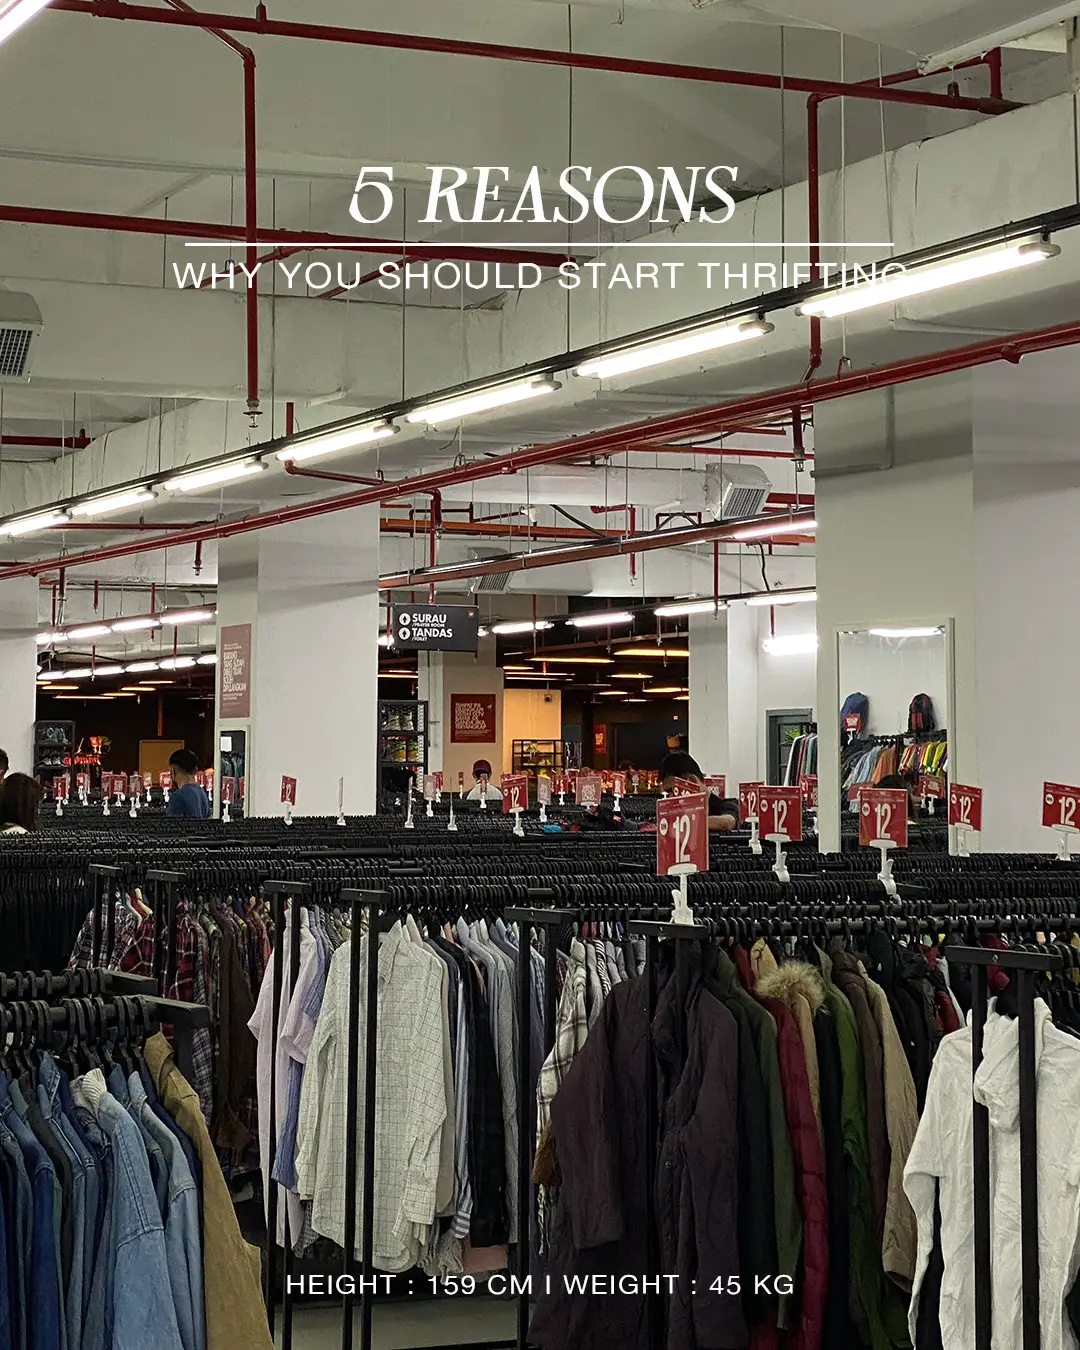 5 Reasons Why You Should Start Thrifting  's images(0)